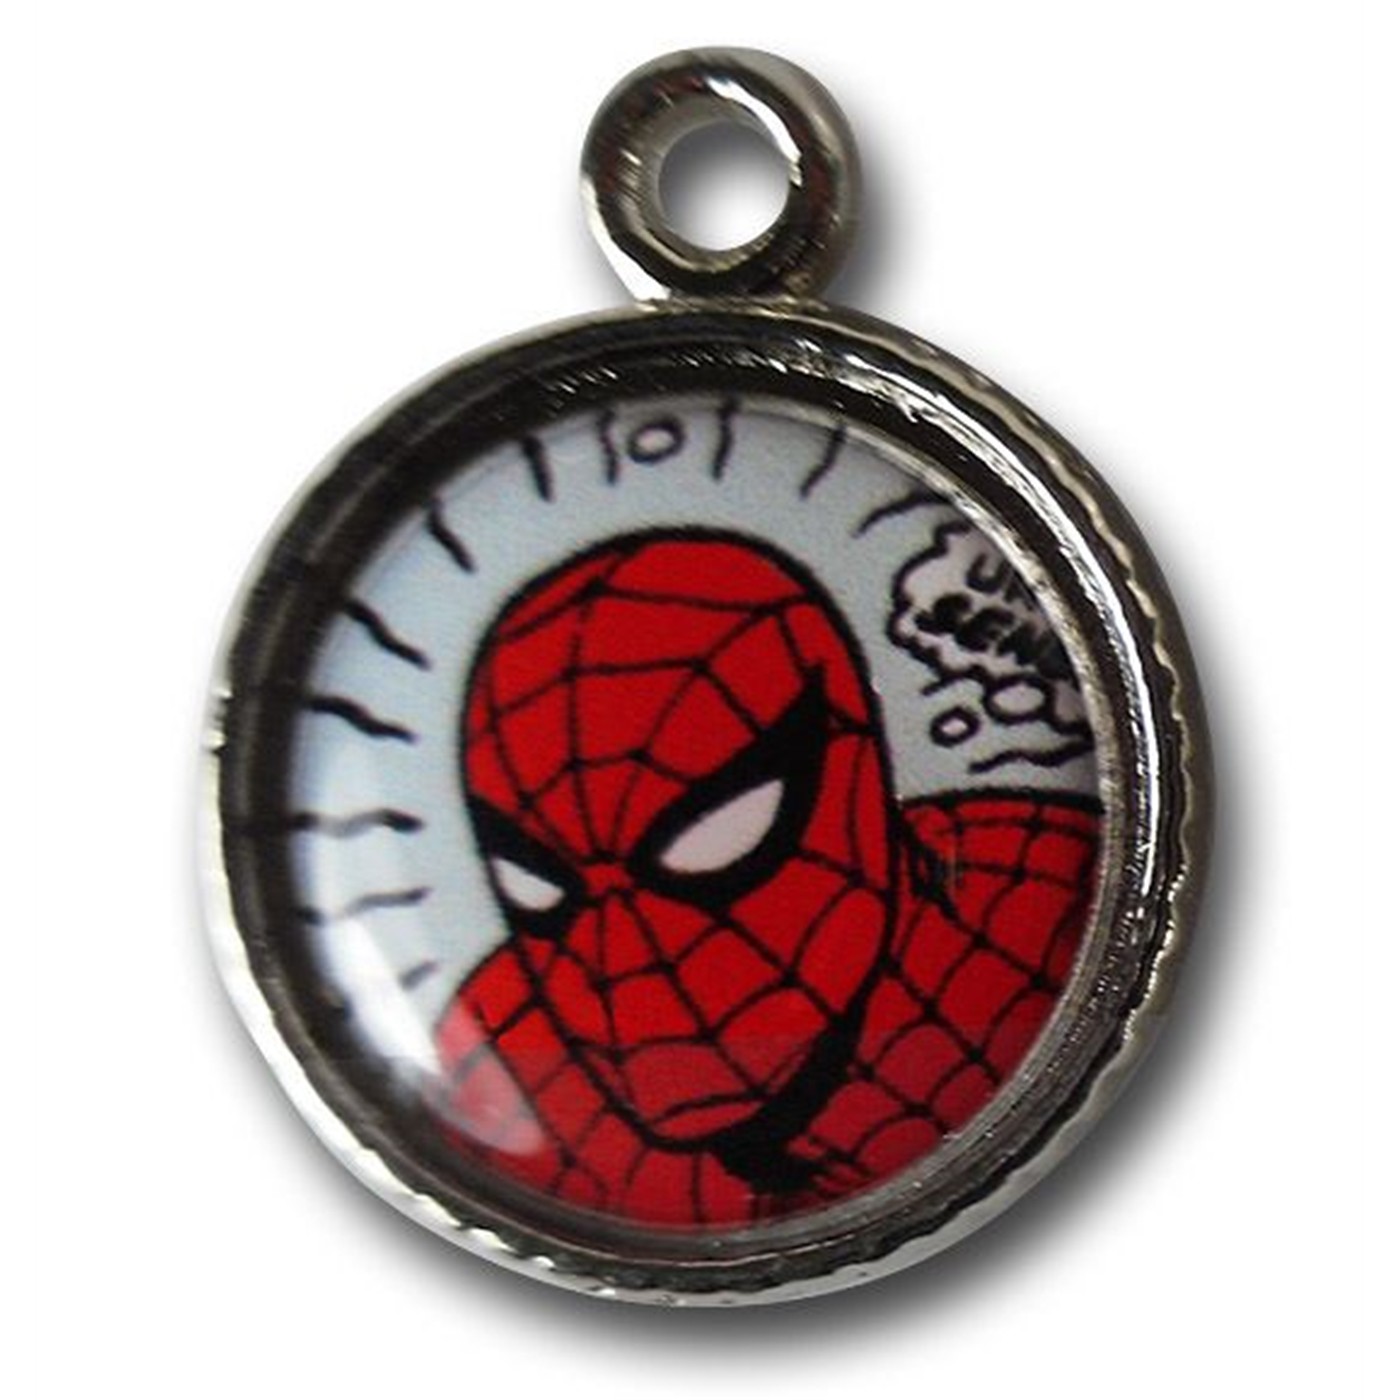 SPIDER-MAN SPIDERMAN JEWELRY CHARM PET DOG COLLAR CLOTHING HAIR ACCESSORY  KEYCHAIN PURSE BACKPACK